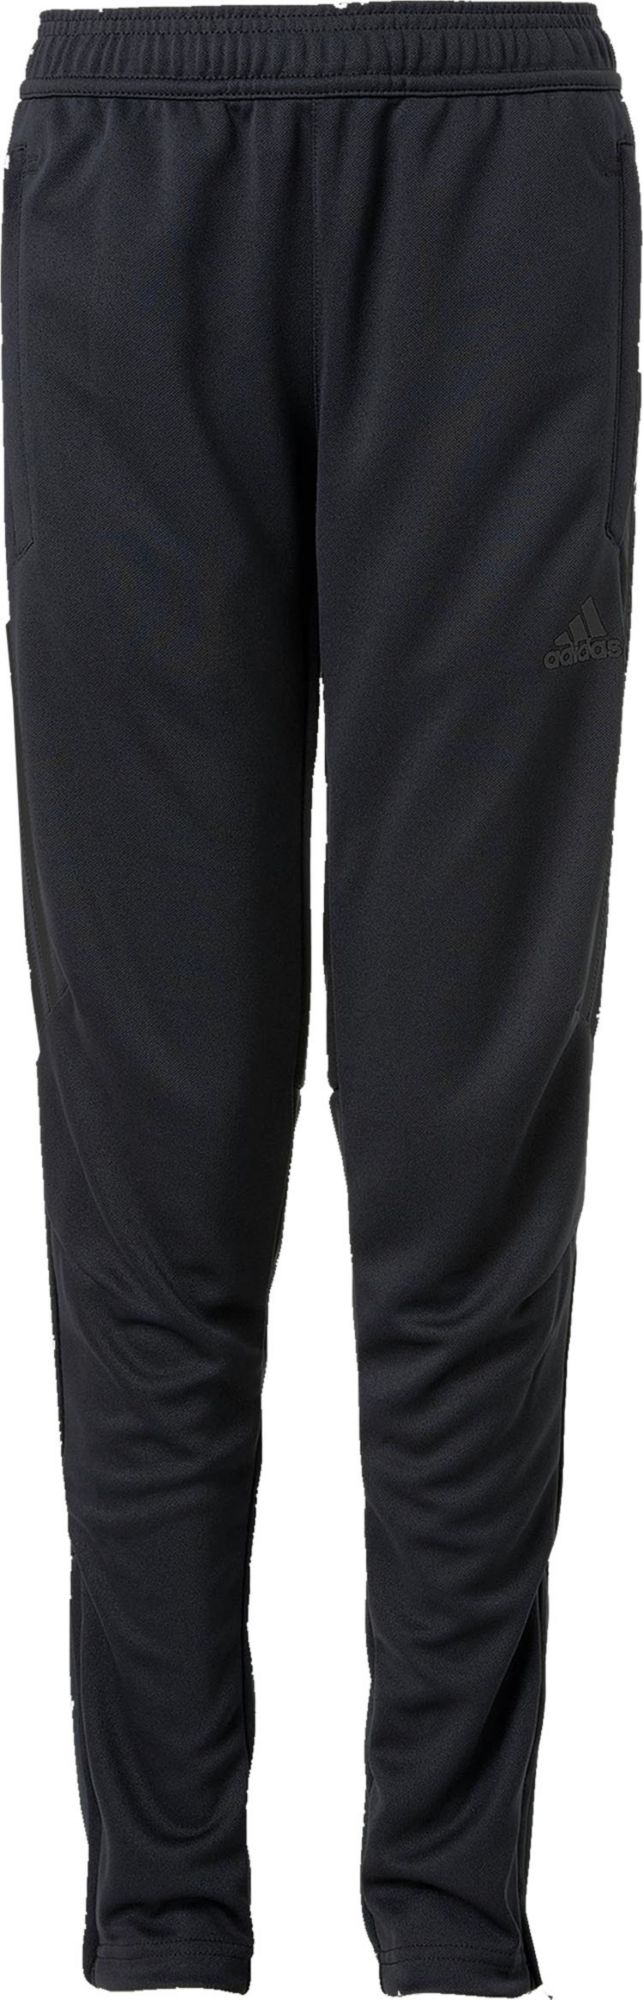 adidas youth tapered soccer pants